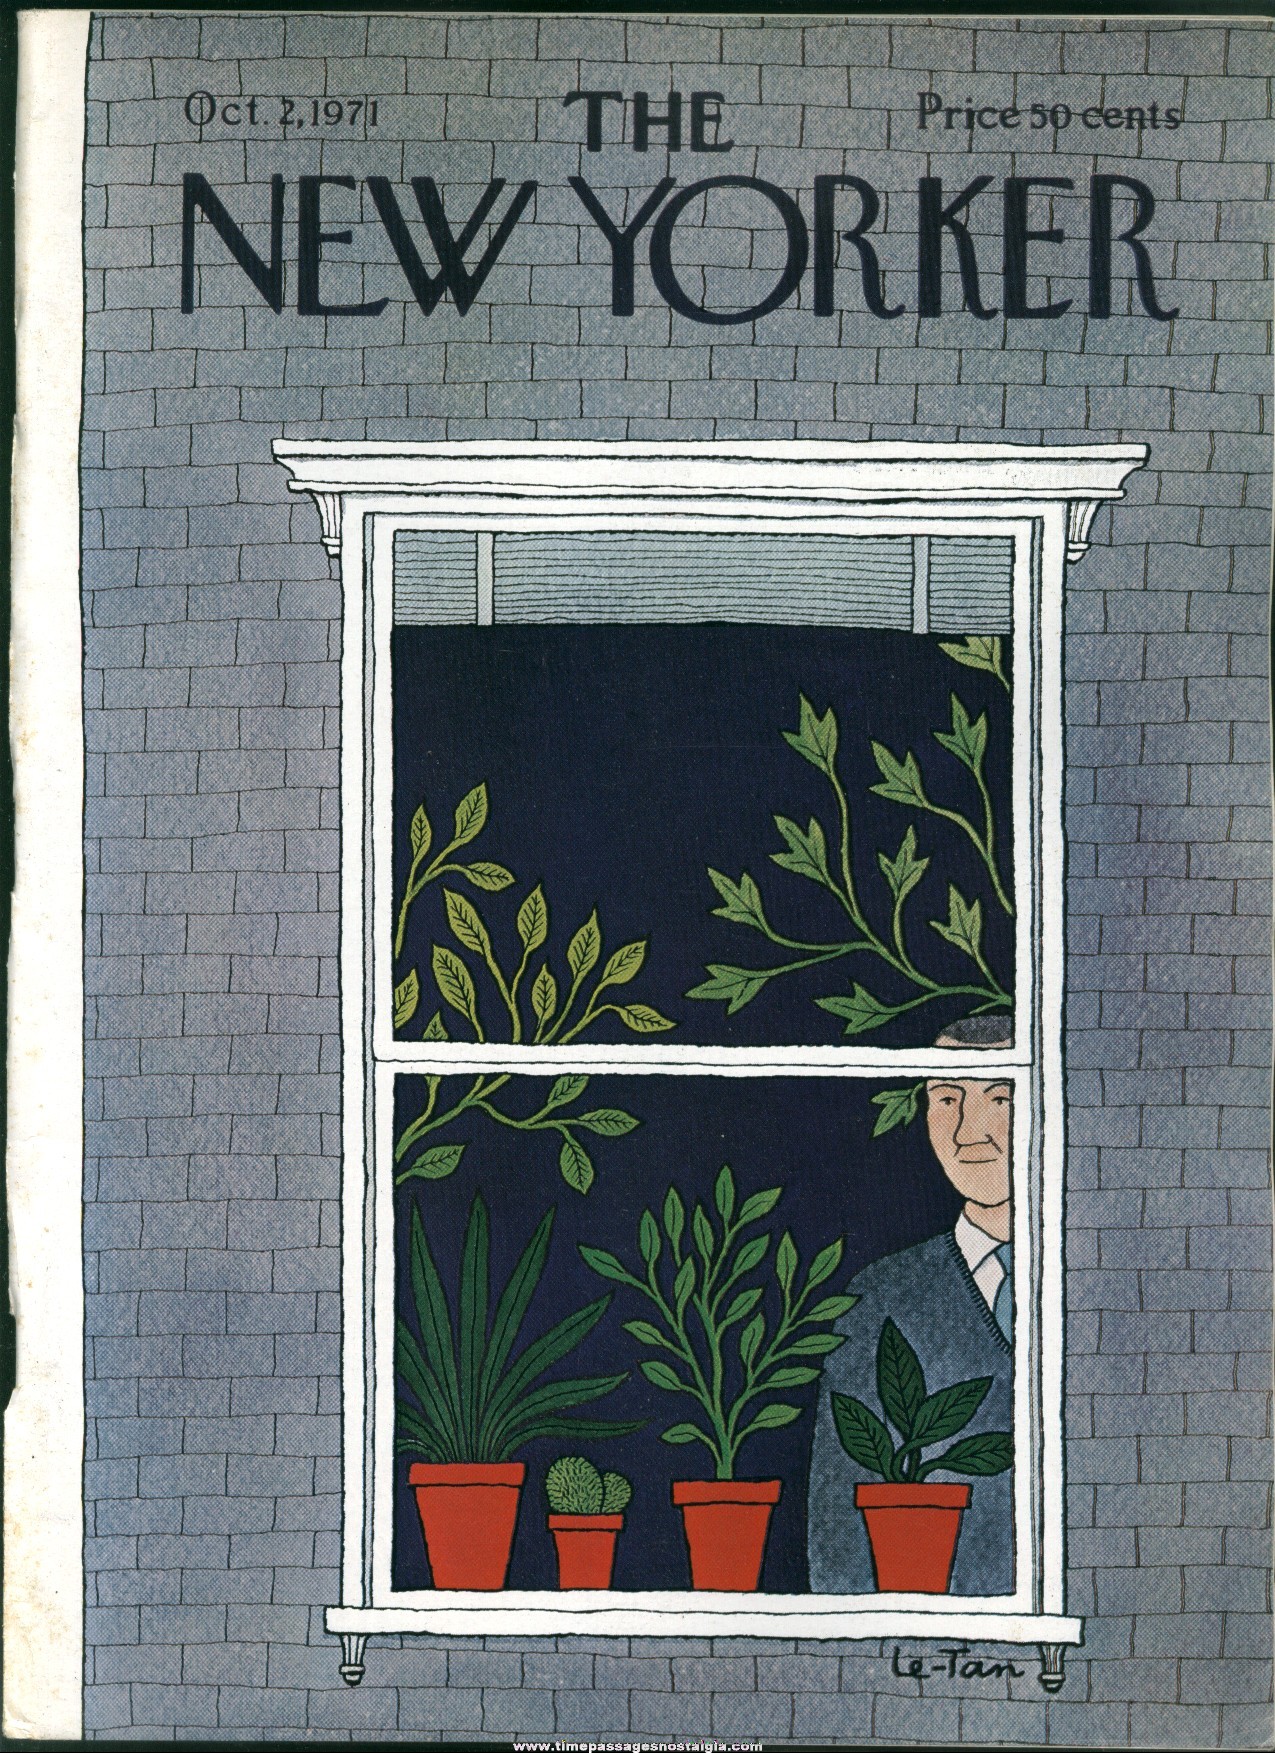 New Yorker Magazine - October 2, 1971 - Cover by Pierre Le-Tan